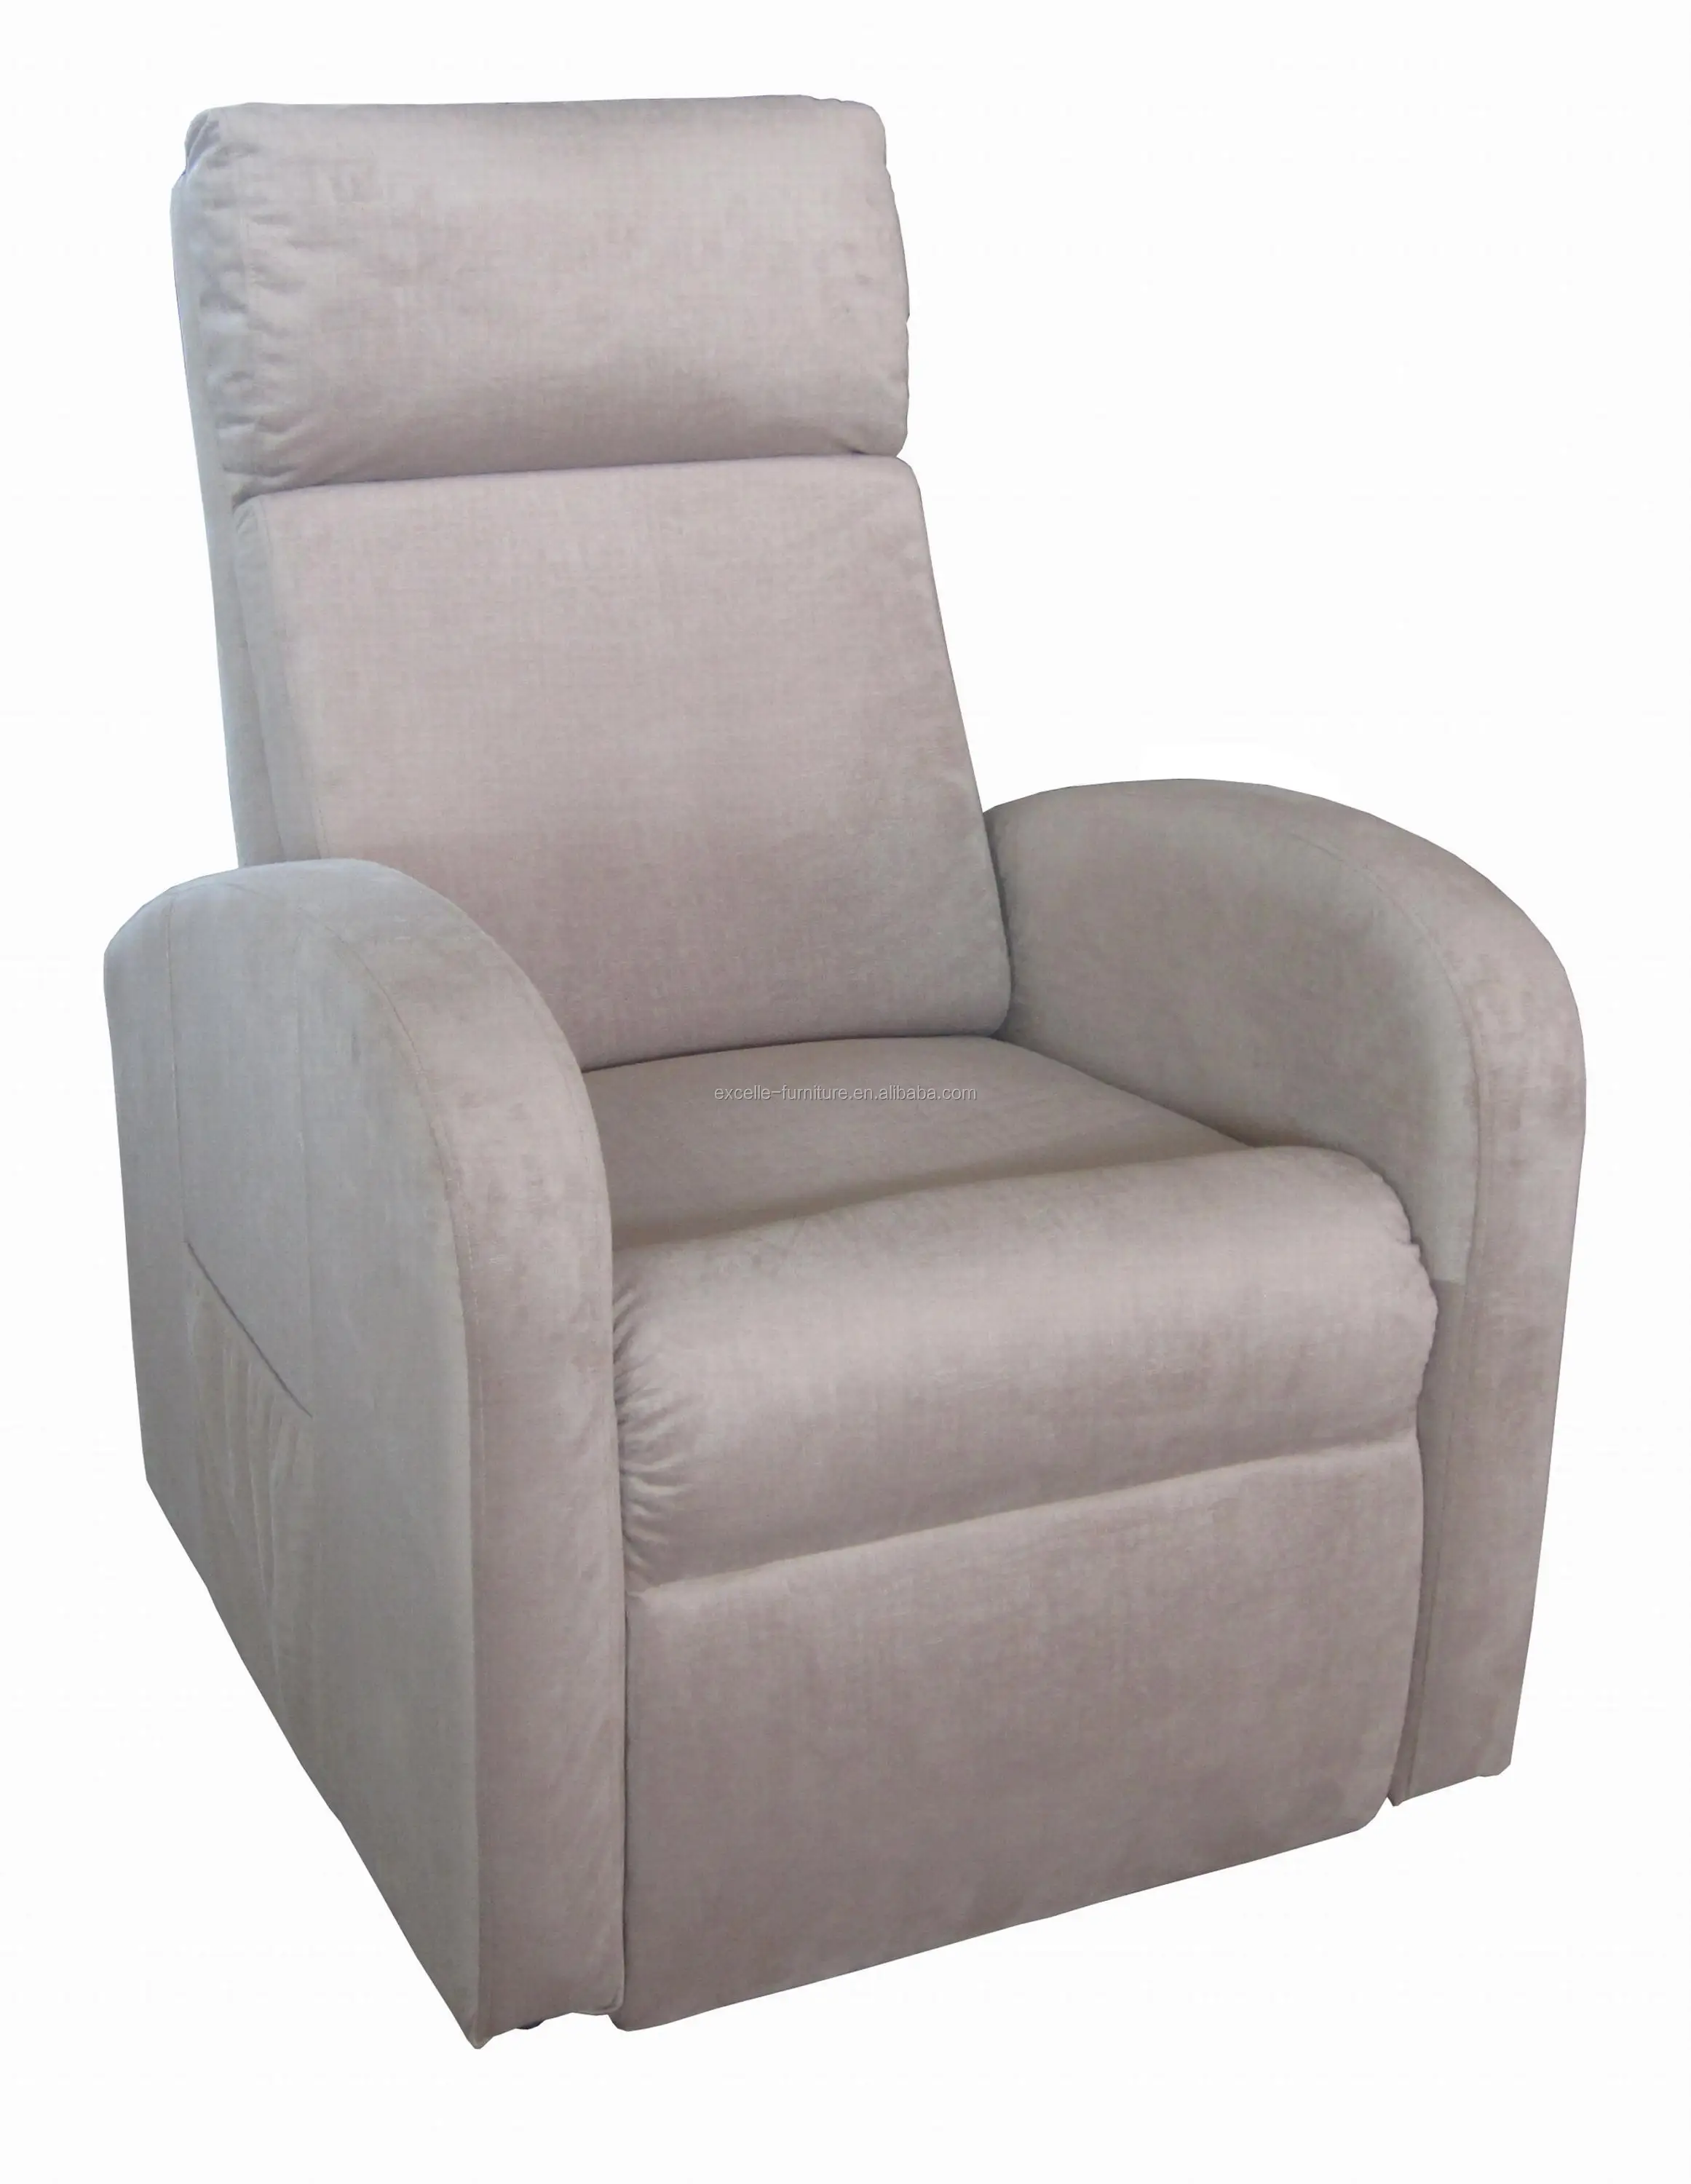 Electric Recliner Sofa Cheers Leather Sofa Recliner Electric Seat